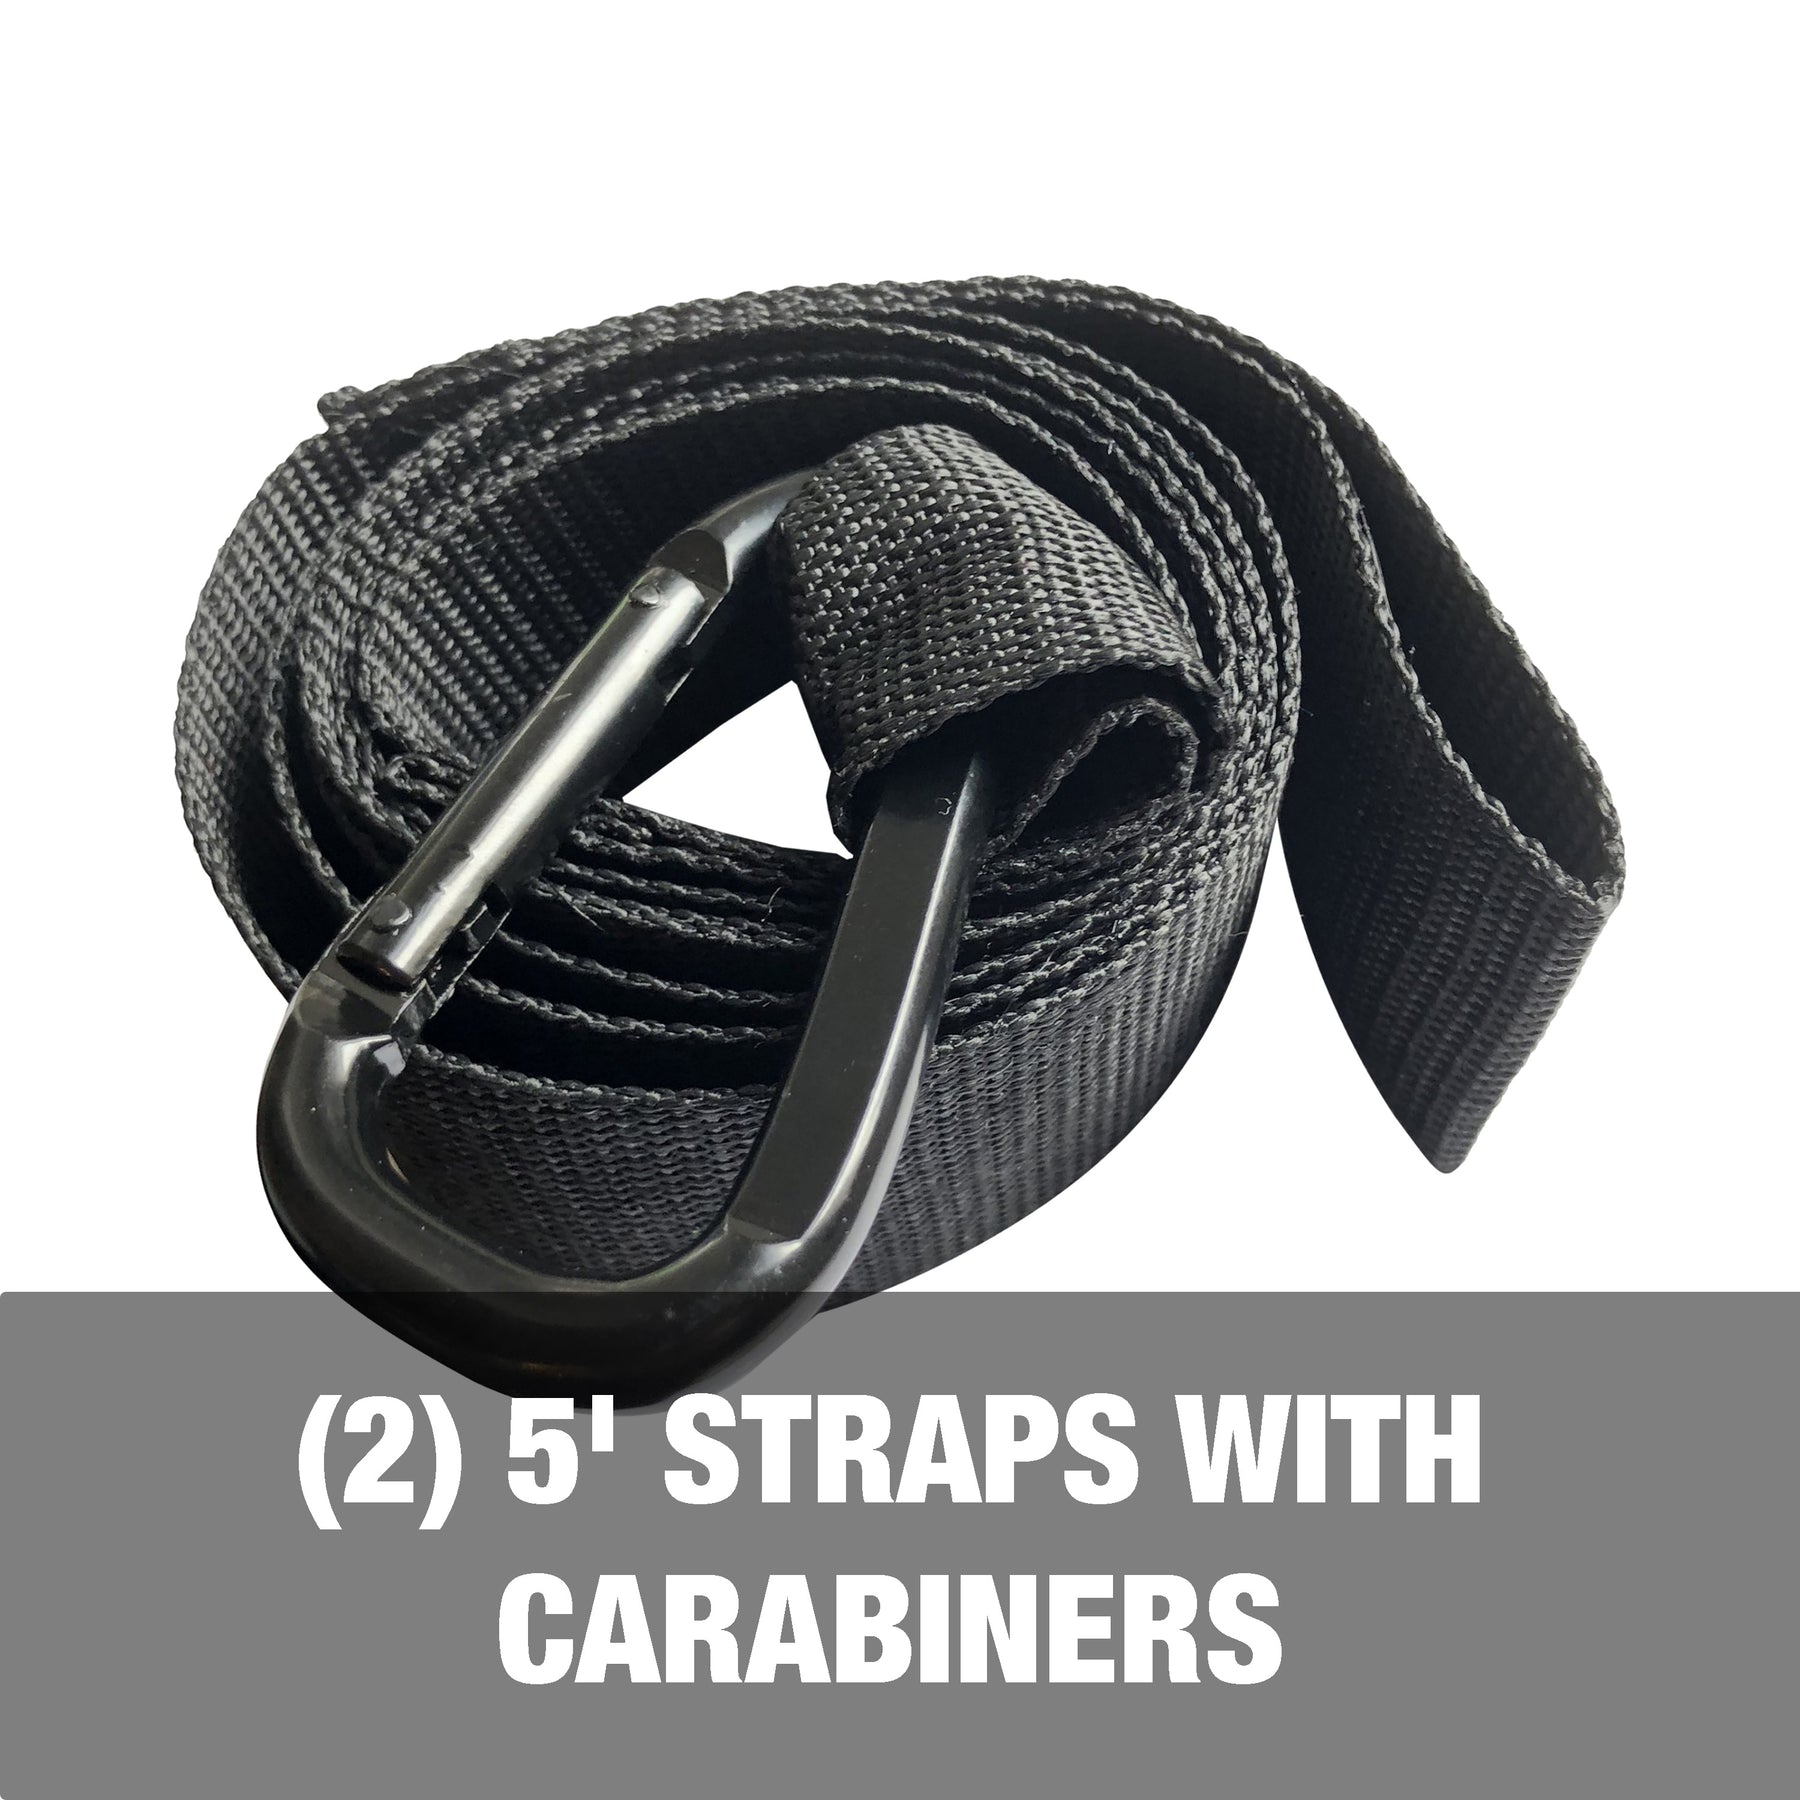 2 5-foot straps with carabiners.